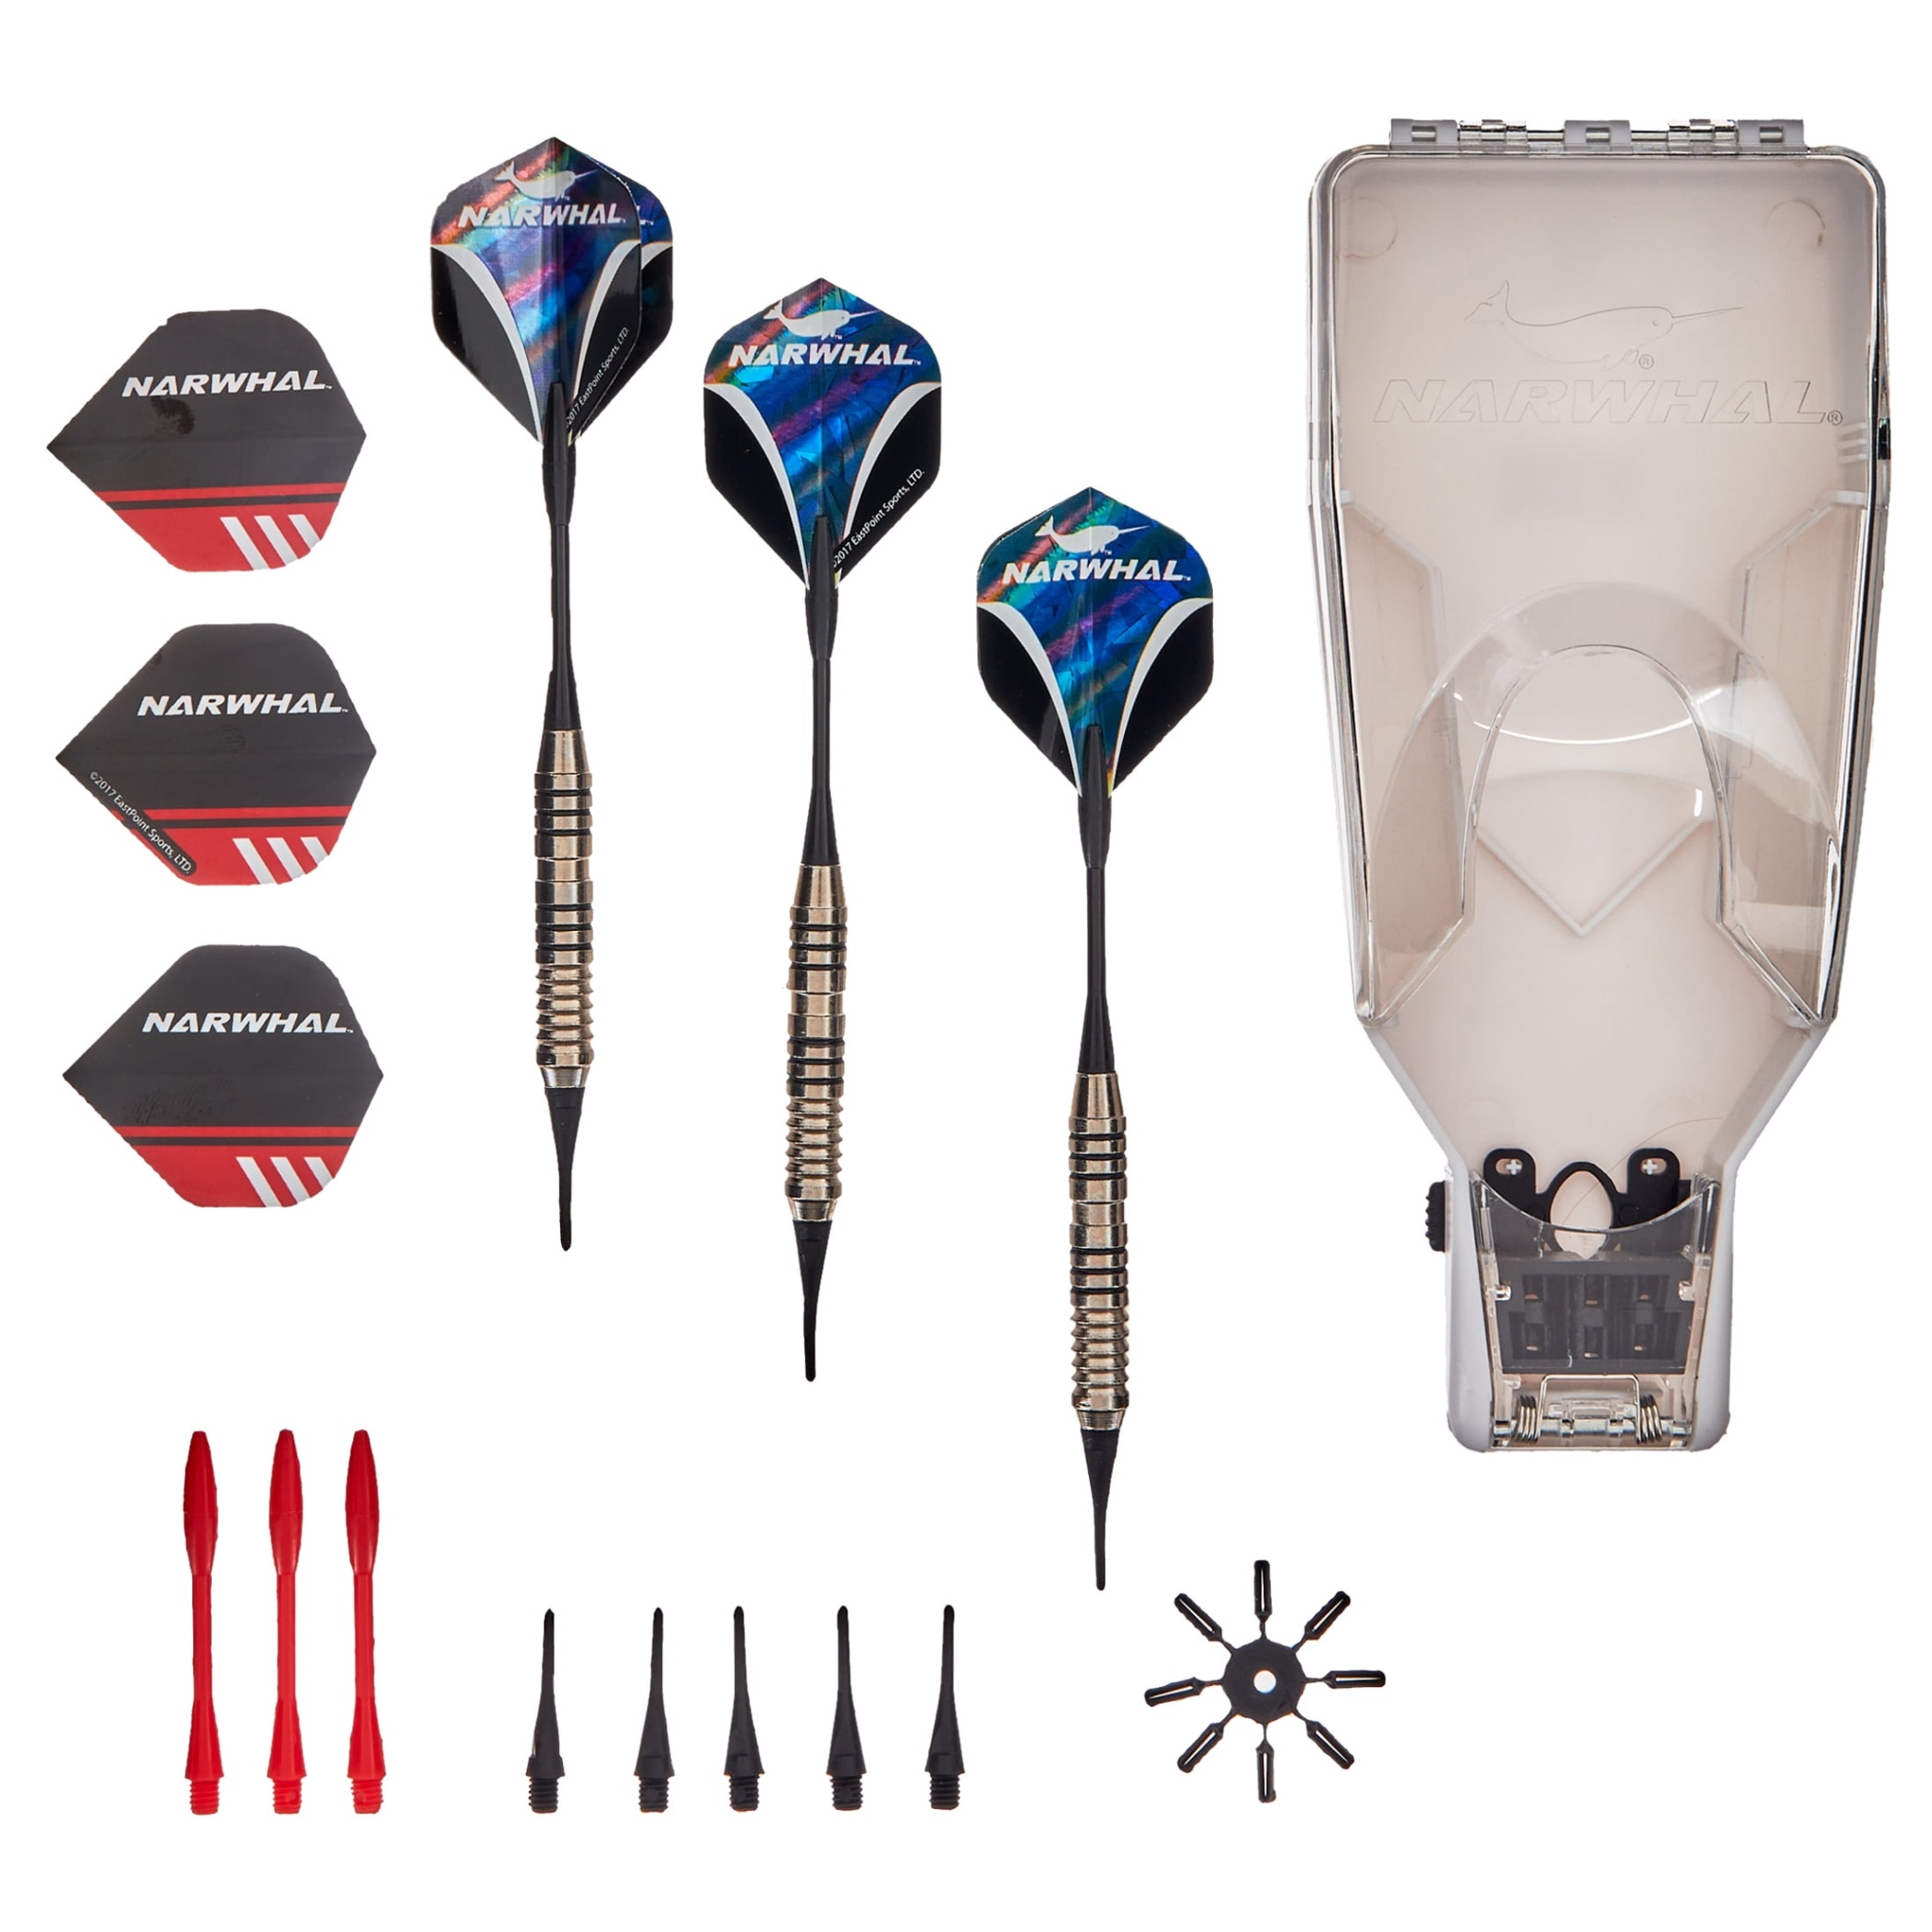 dart accessories near me Niche Utama Home Narwhal Tournament Soft Tip Dart Set for Electronic Dartboards, g,  in